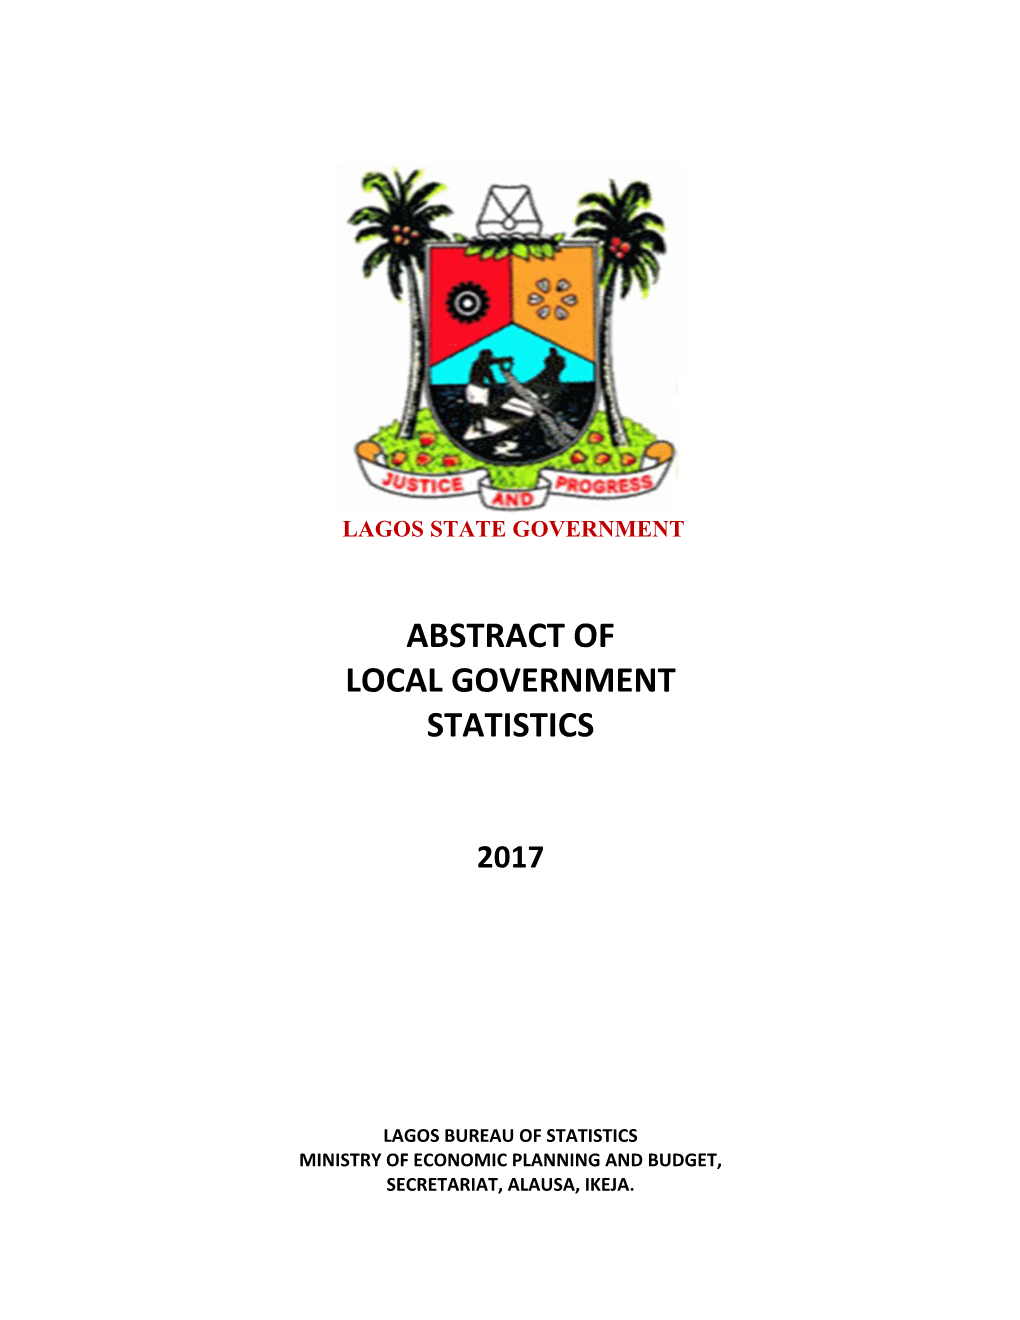 (2017) Abstract of Local Government Statistics